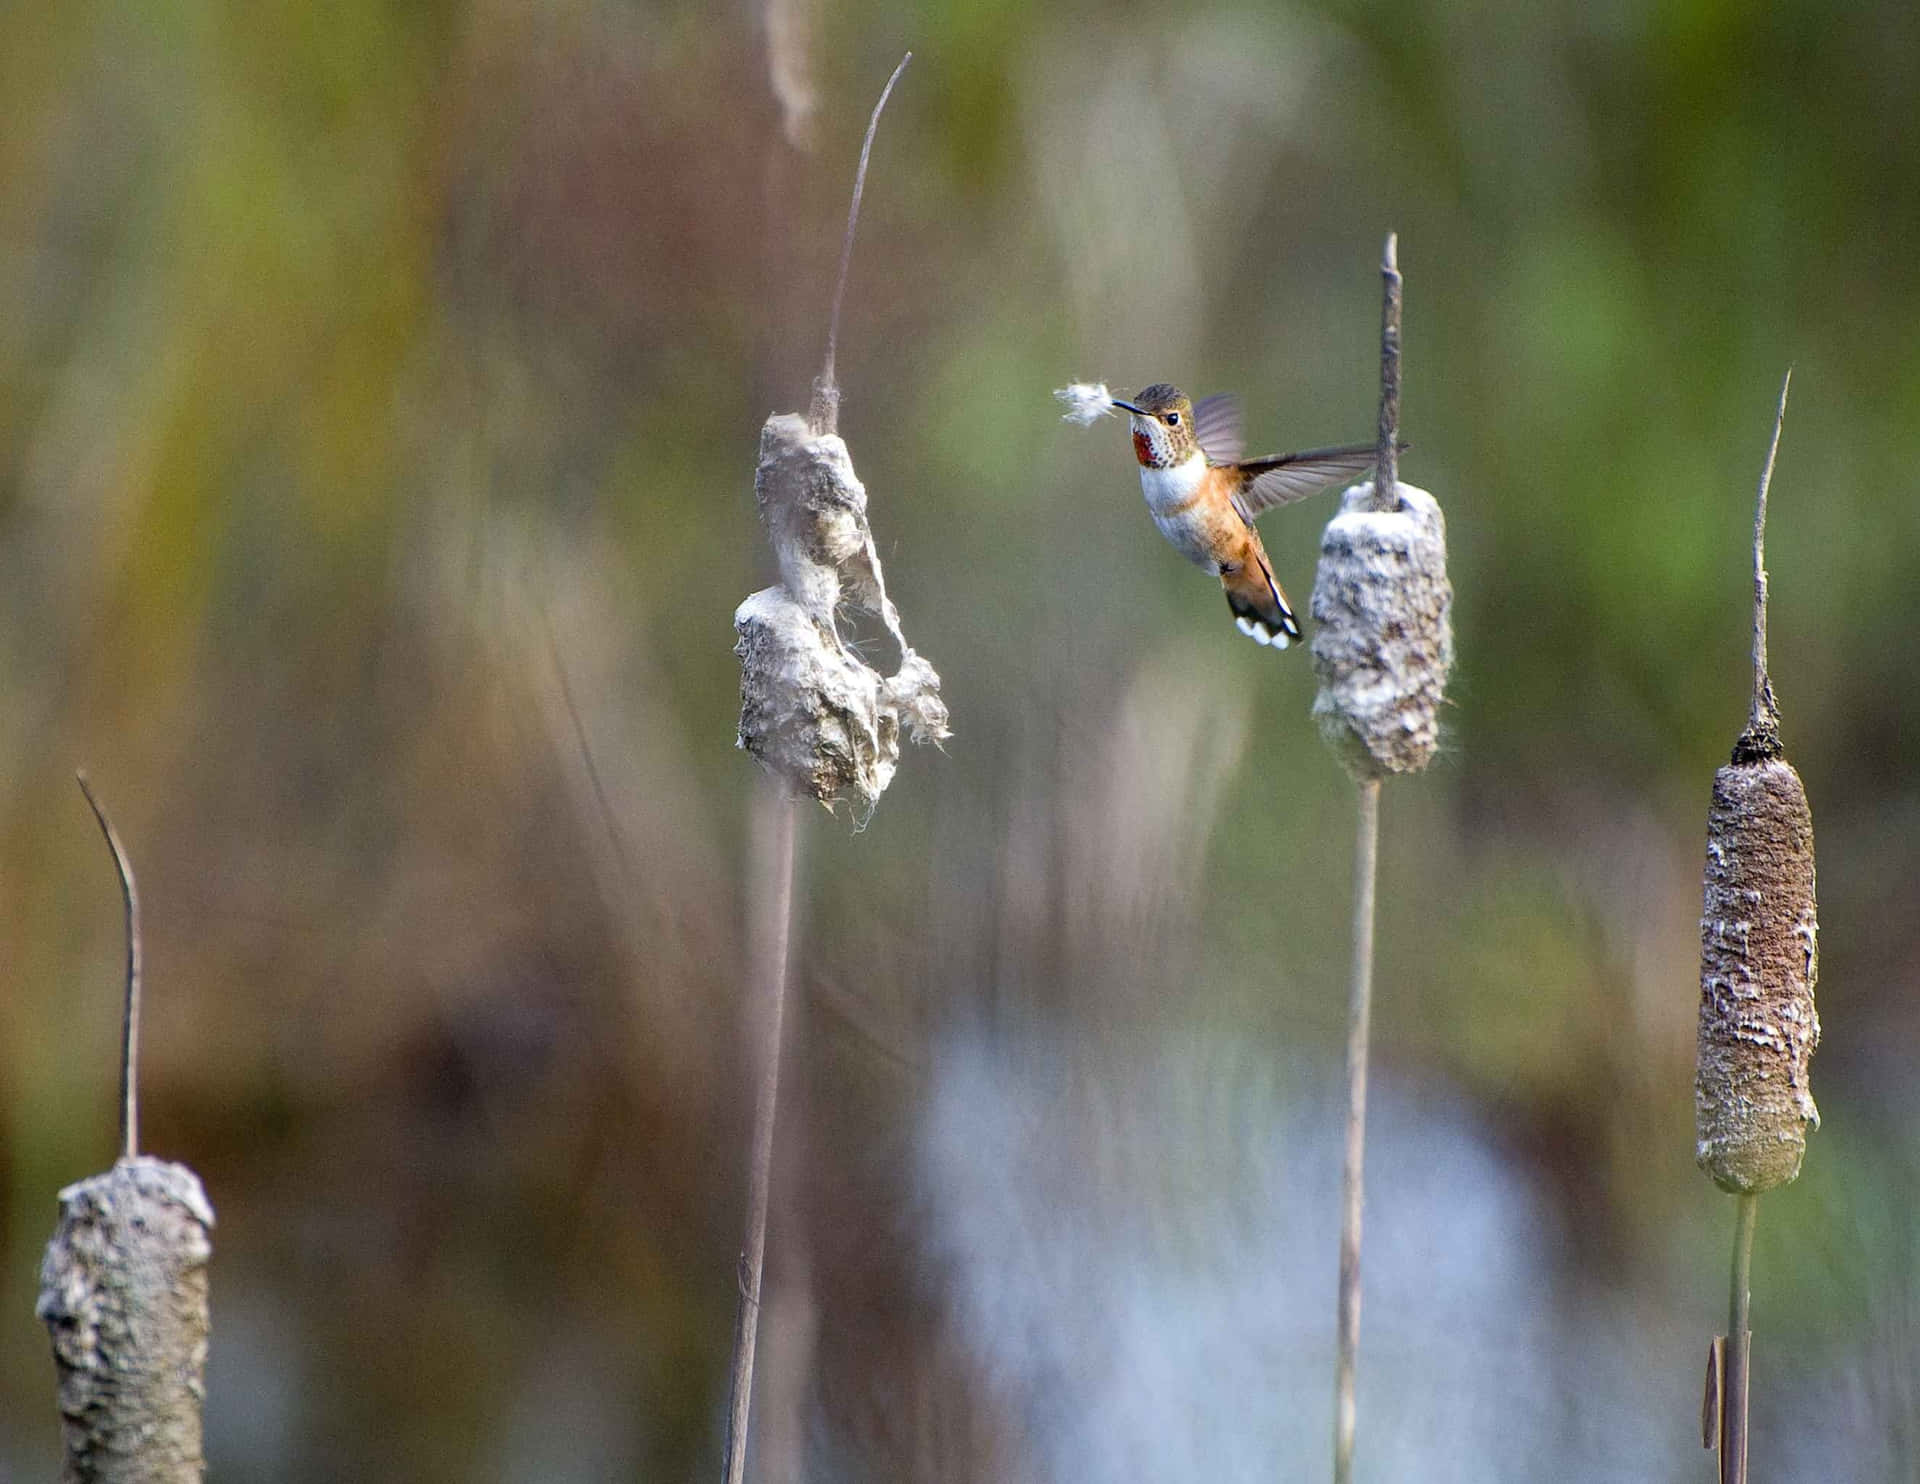 A Hummingbird Is Flying Over A Reed Bed